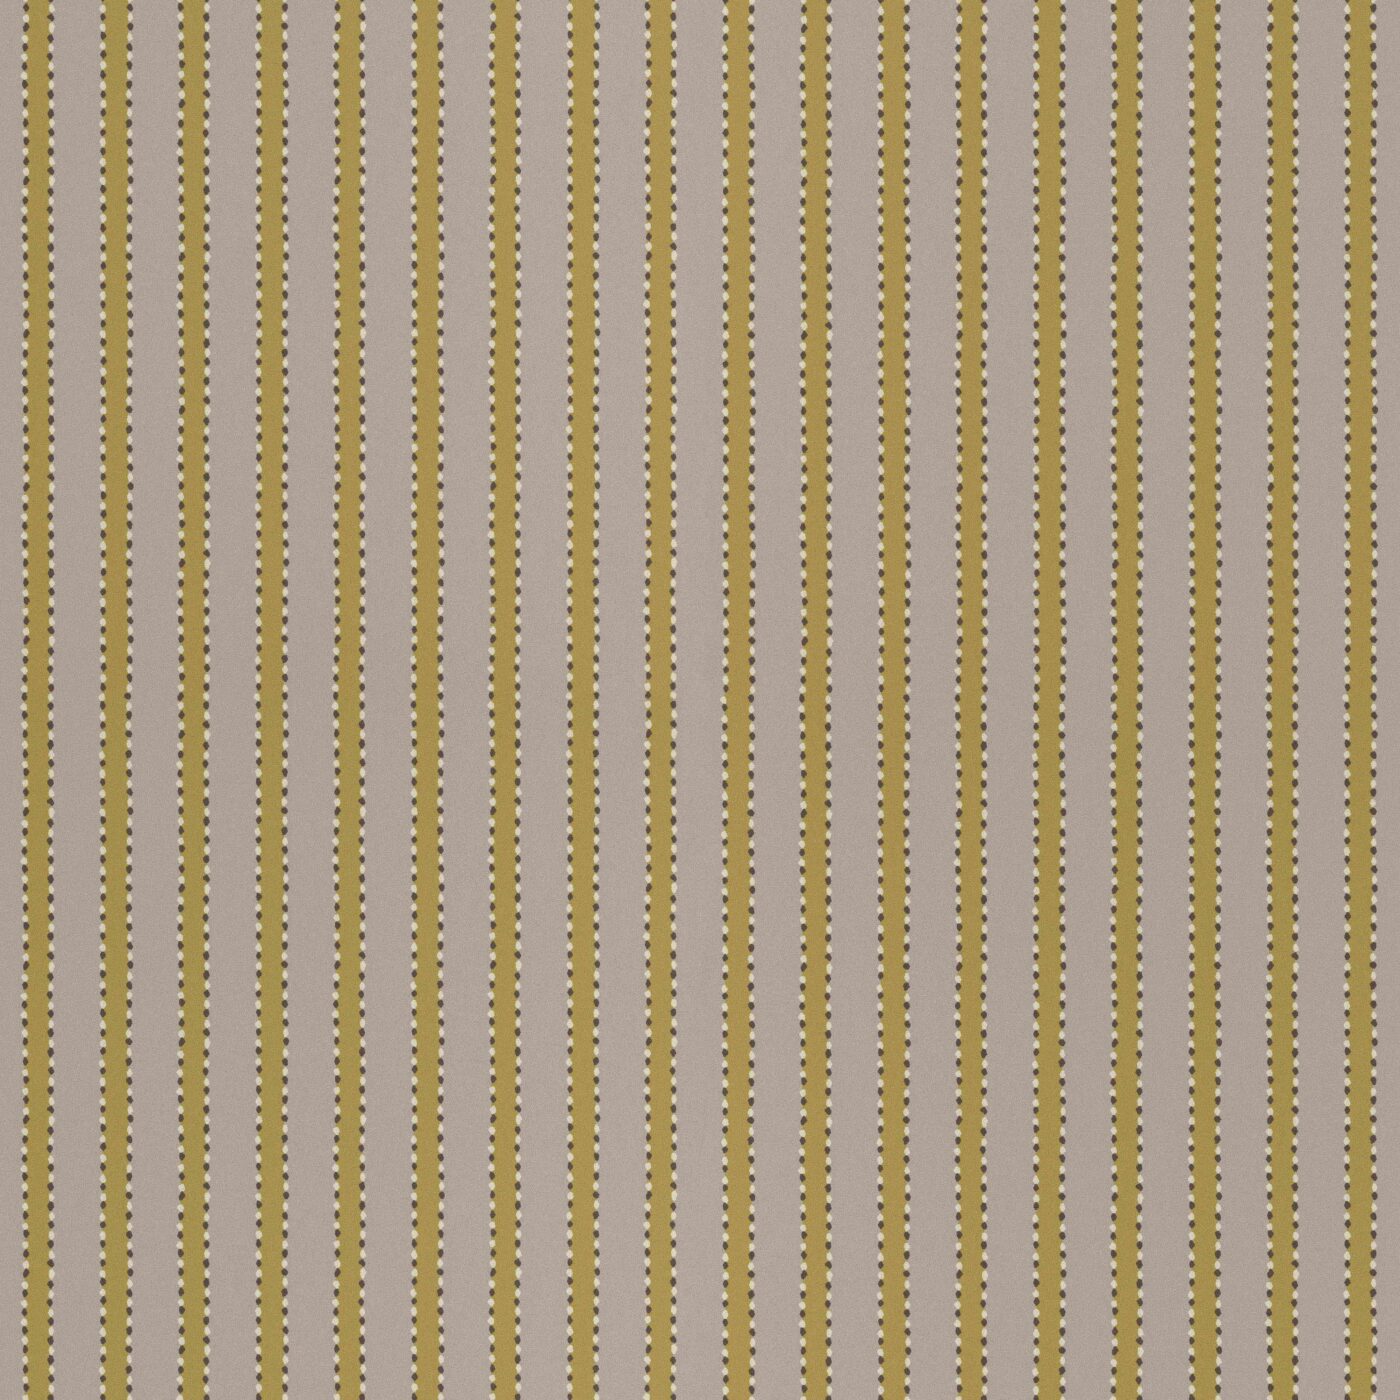 With inspiration from hand tacked textiles the ’stitches’ gives an edge to the stripes in this wallpaper design.